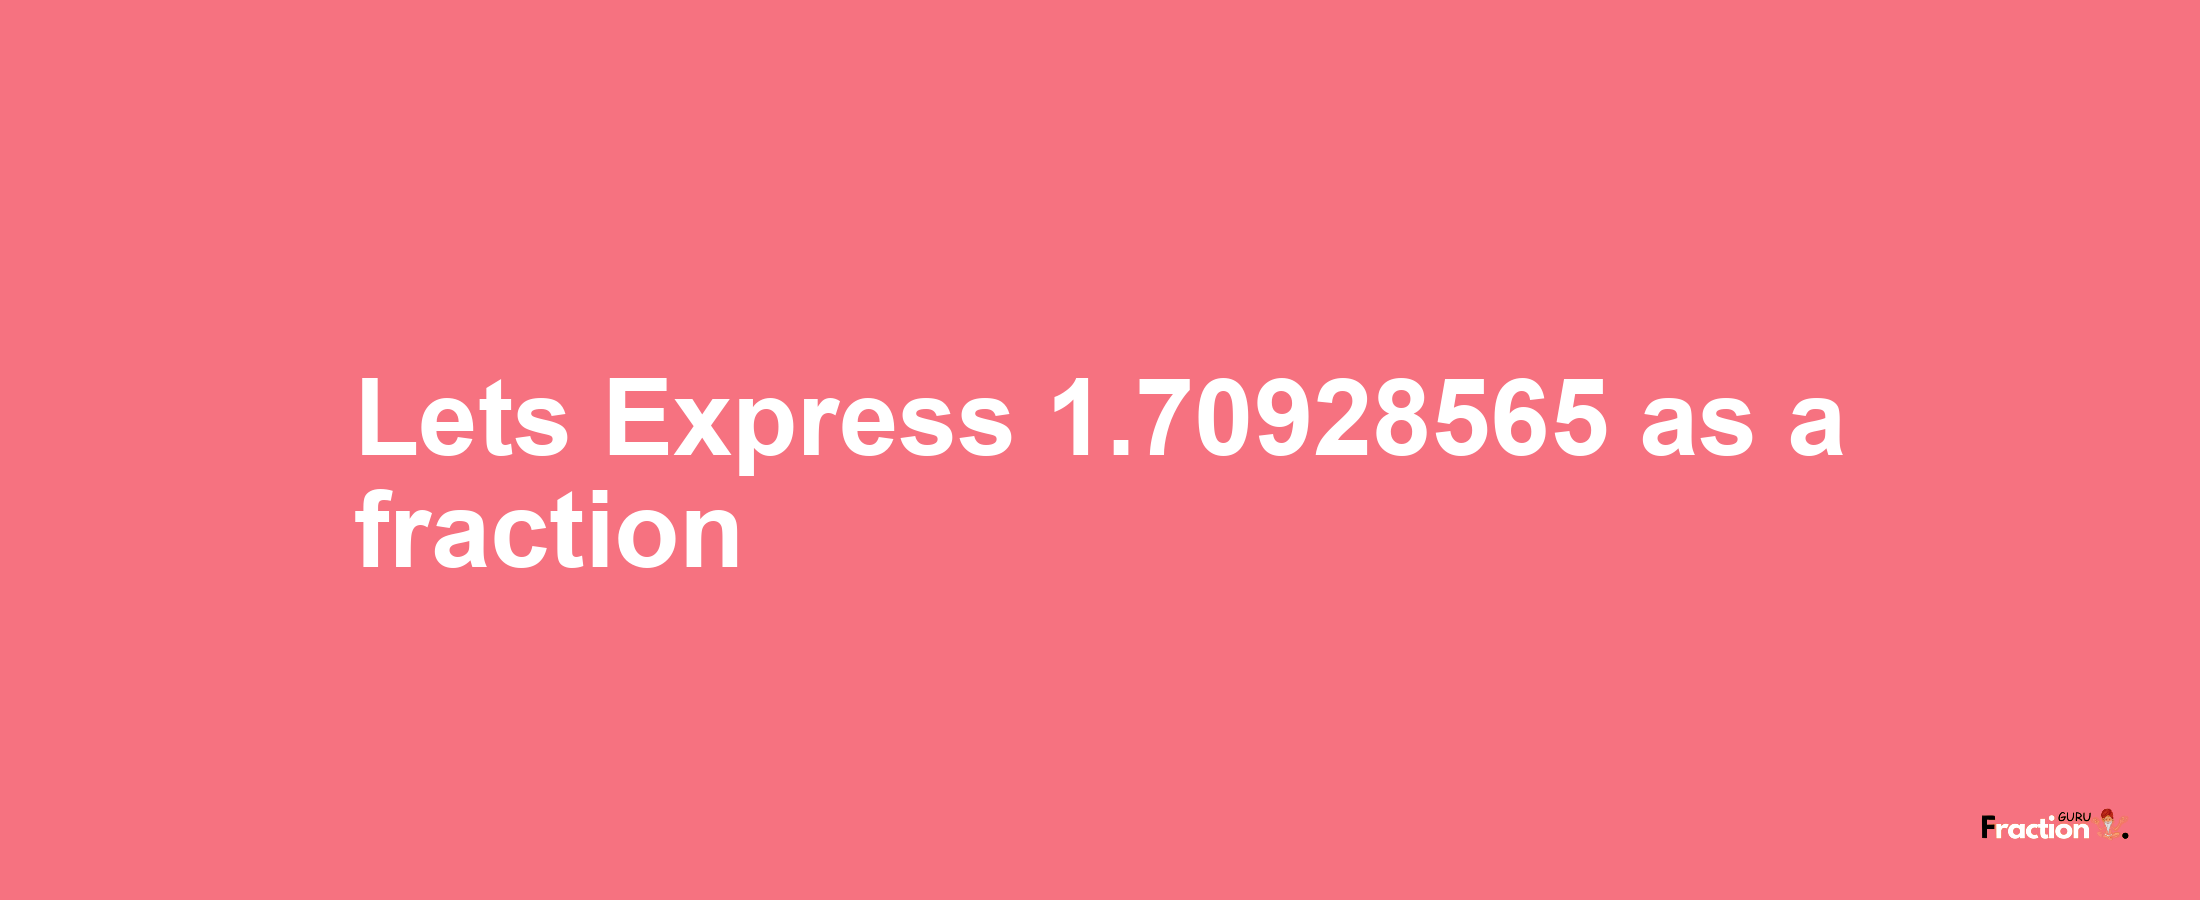 Lets Express 1.70928565 as afraction